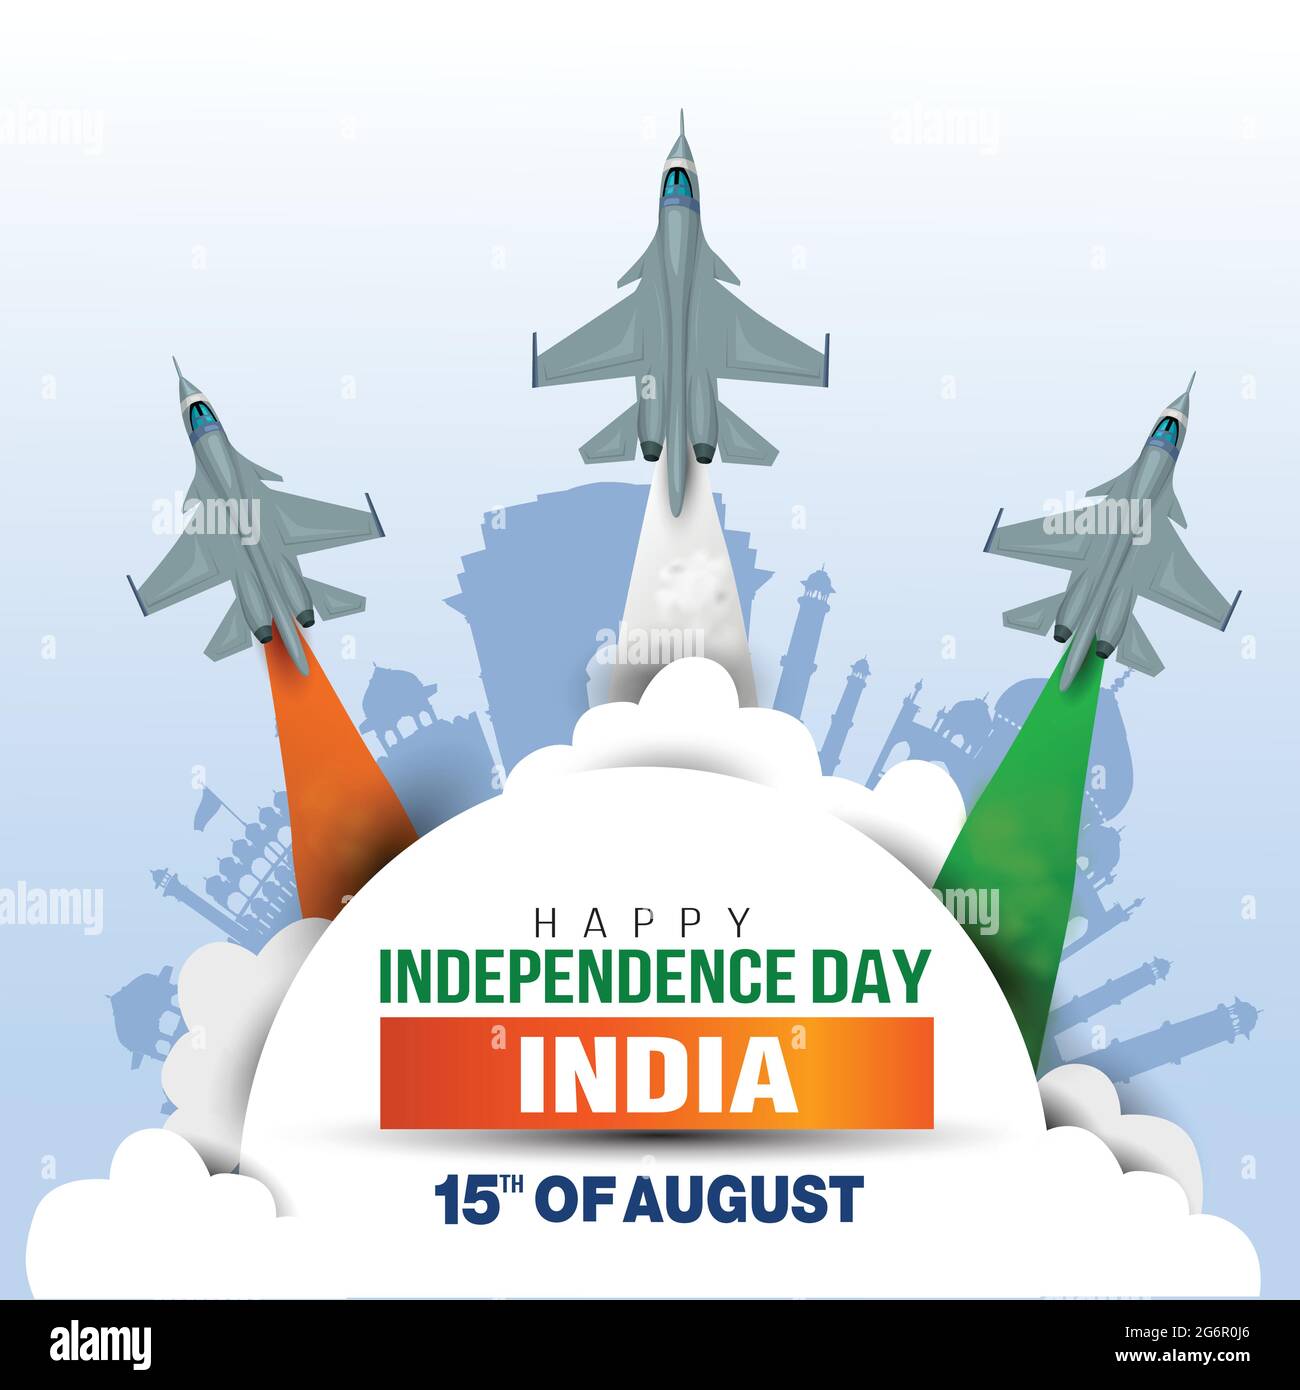 Happy Independence Day India concept with vector illustration of fighter jets and Indian flag colors, with blue background. Stock Vector